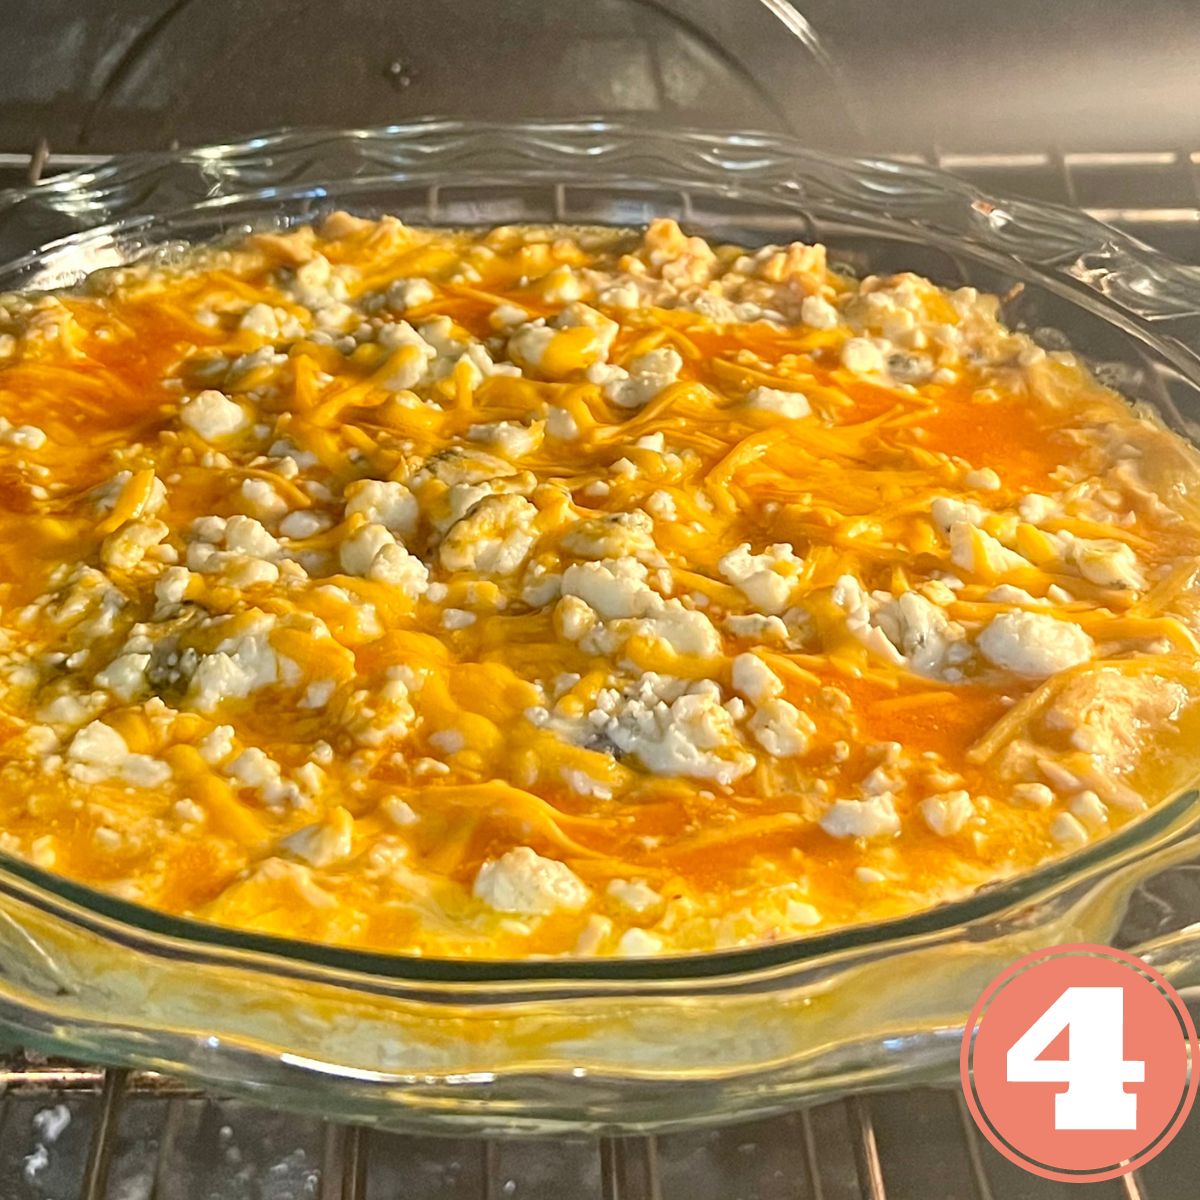 Baked Buffalo Chicken Dip in the oven